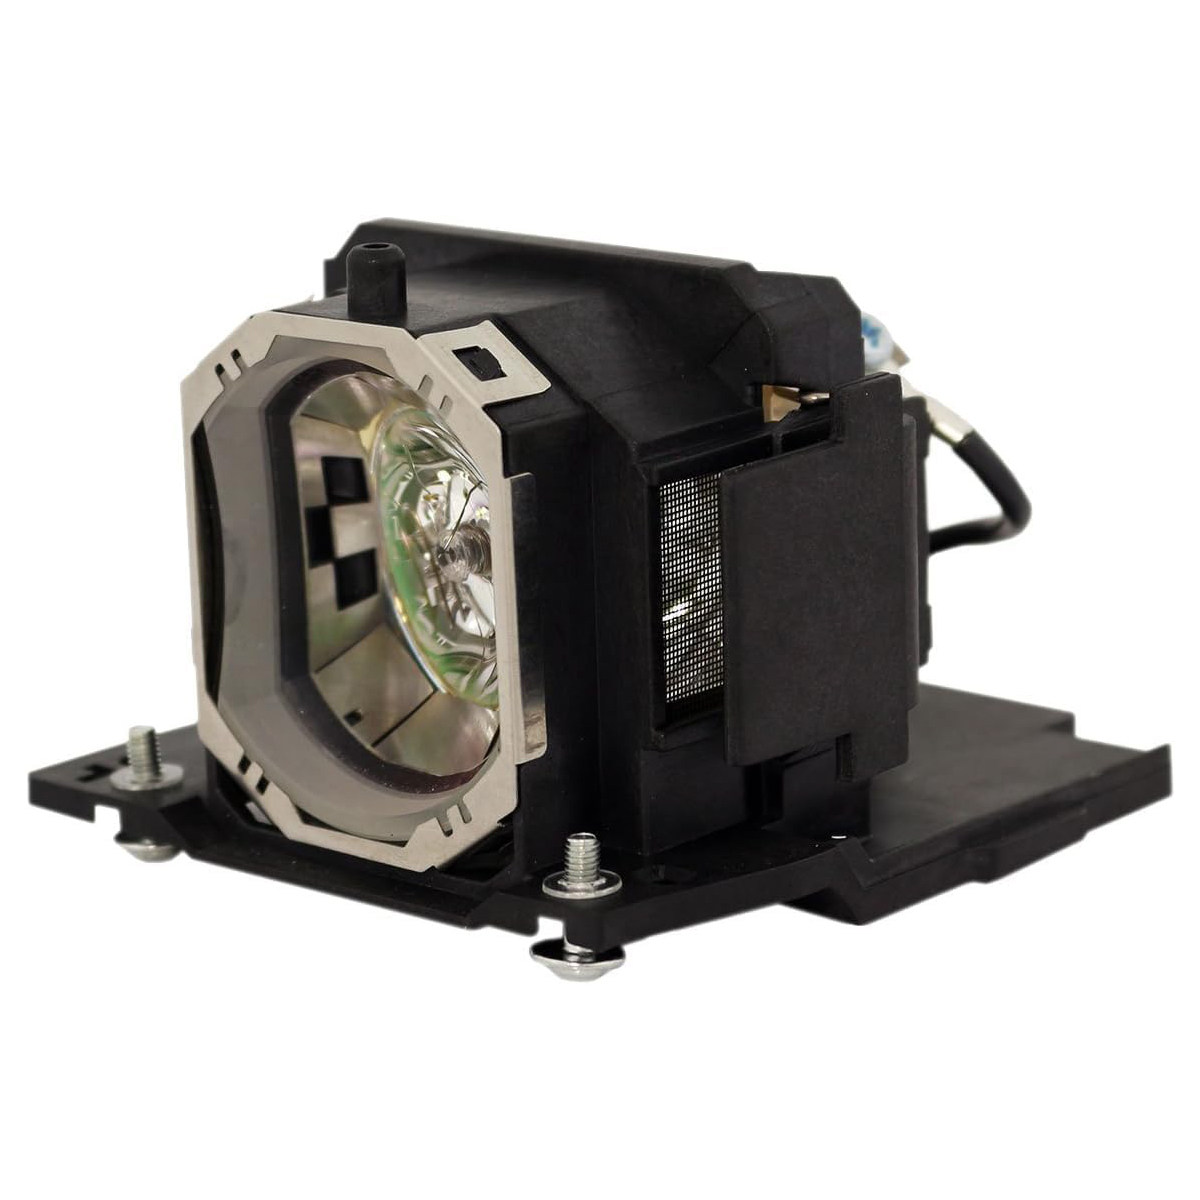 Replacement Projector lamp 456-8788 For Dukane Projector